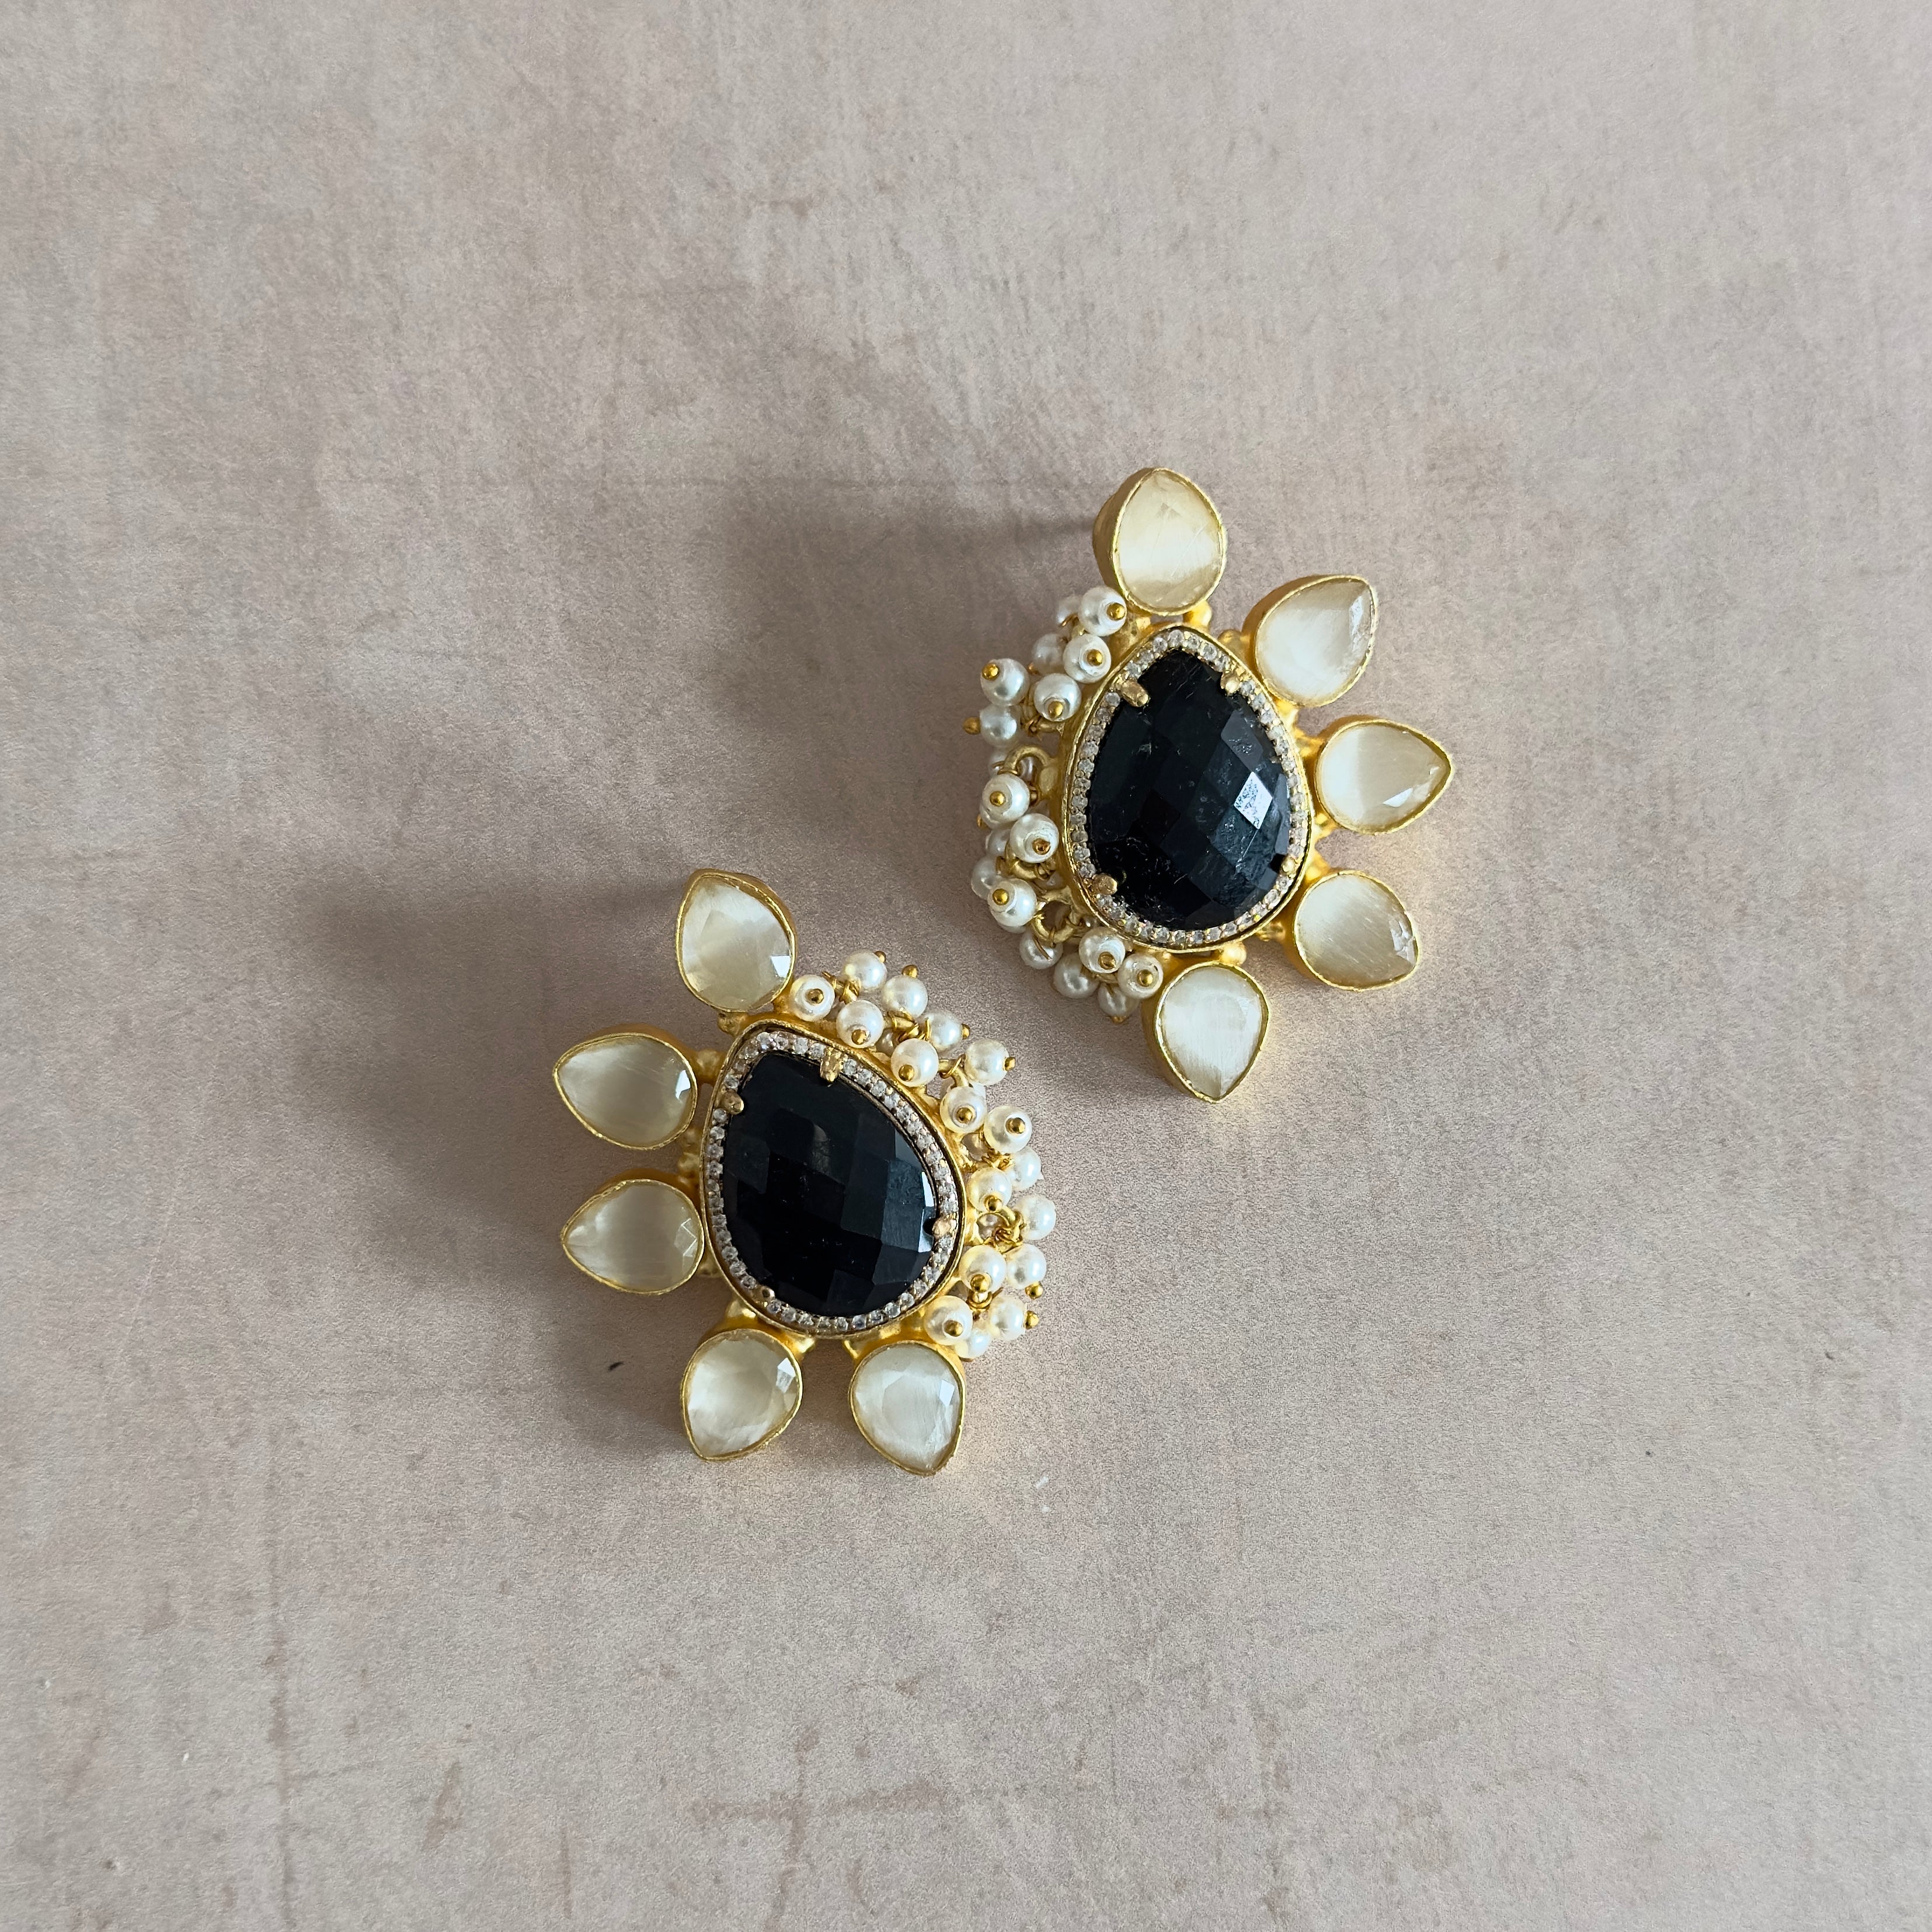 Elevate your style with our Amara Black Stud Earrings! Made with black onyx and grey stones, these statement studs are perfect for adding a touch of sophistication to any outfit. Add these to your collection and make a bold statement with every wear!